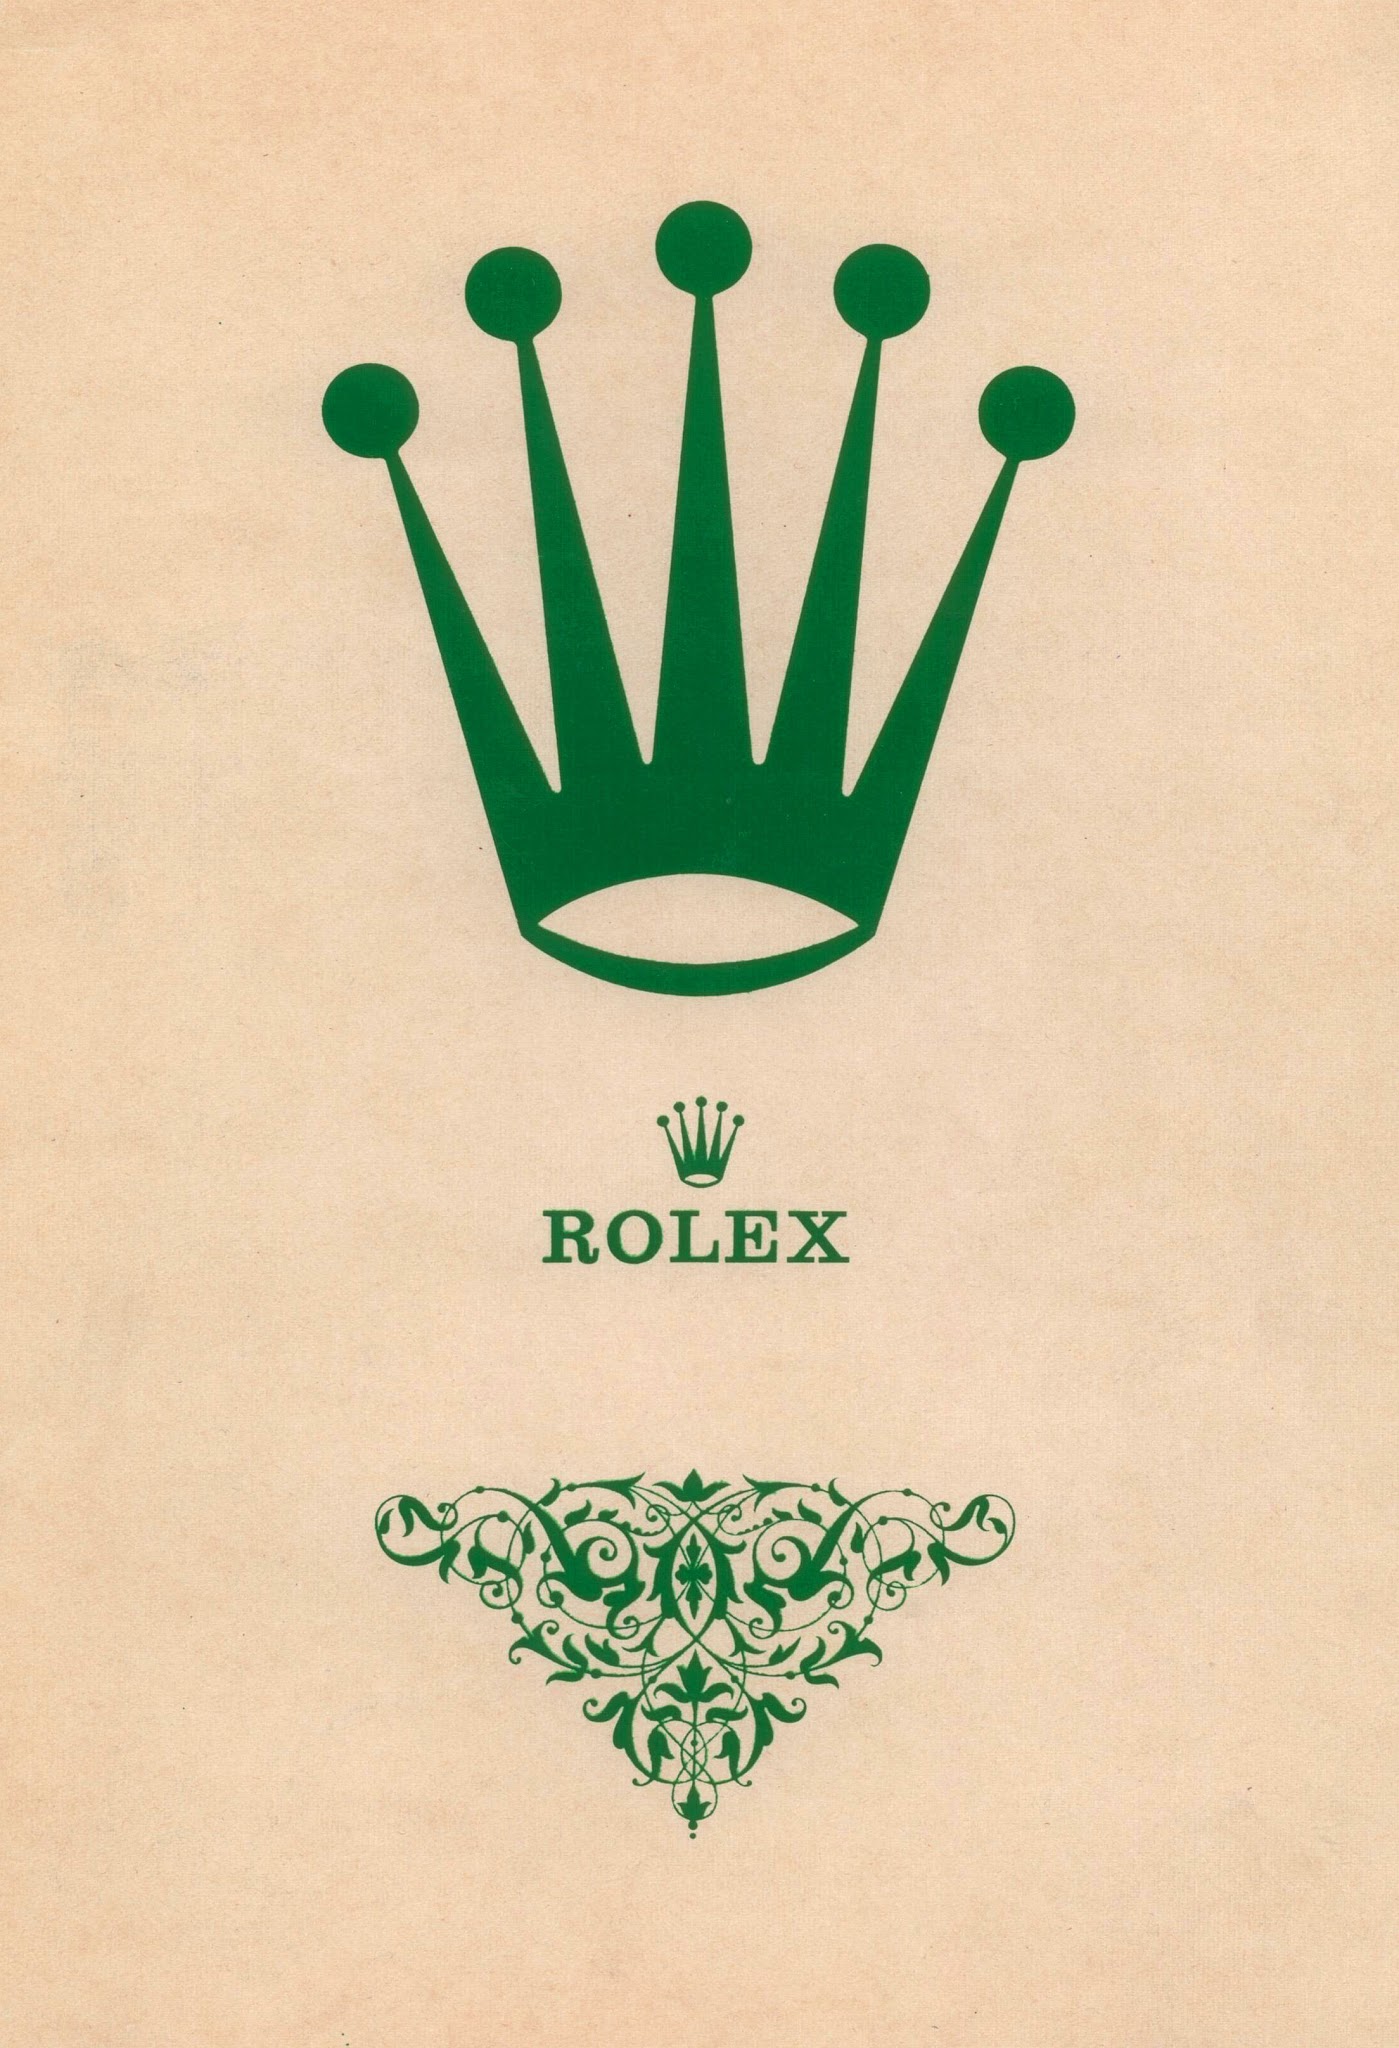 Welcome To Rolexmagazine Com Home Of Jake S Rolex World Magazine Optimized For Ipad And Iphone Rolex Crown Logo History